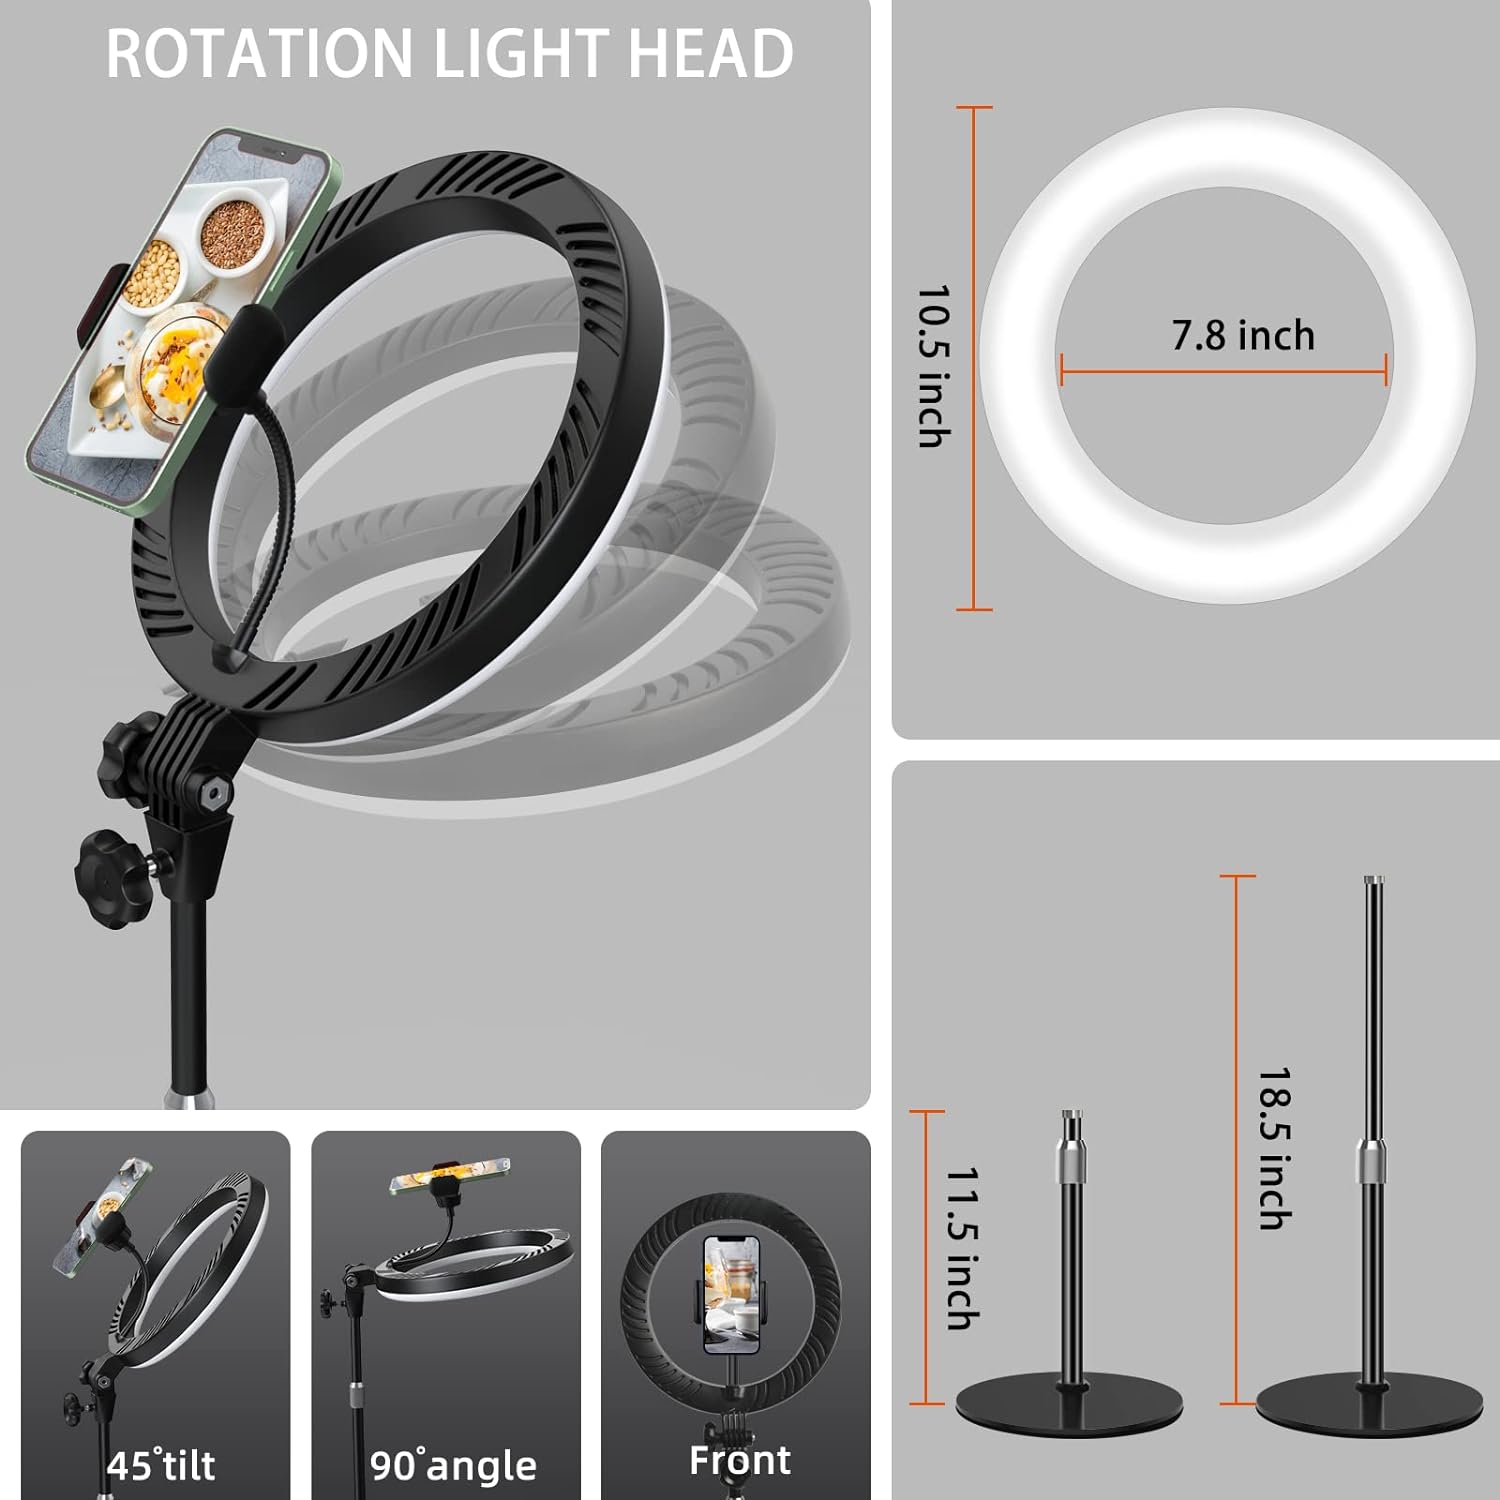 Desktop Ring Light for Zoom Meetings - 10.5' Computer Ring Light with Stand and Phone Holder for Laptop Video Conference/Online Video Call/Make up/Video Recording/iPhone Photo Lighting